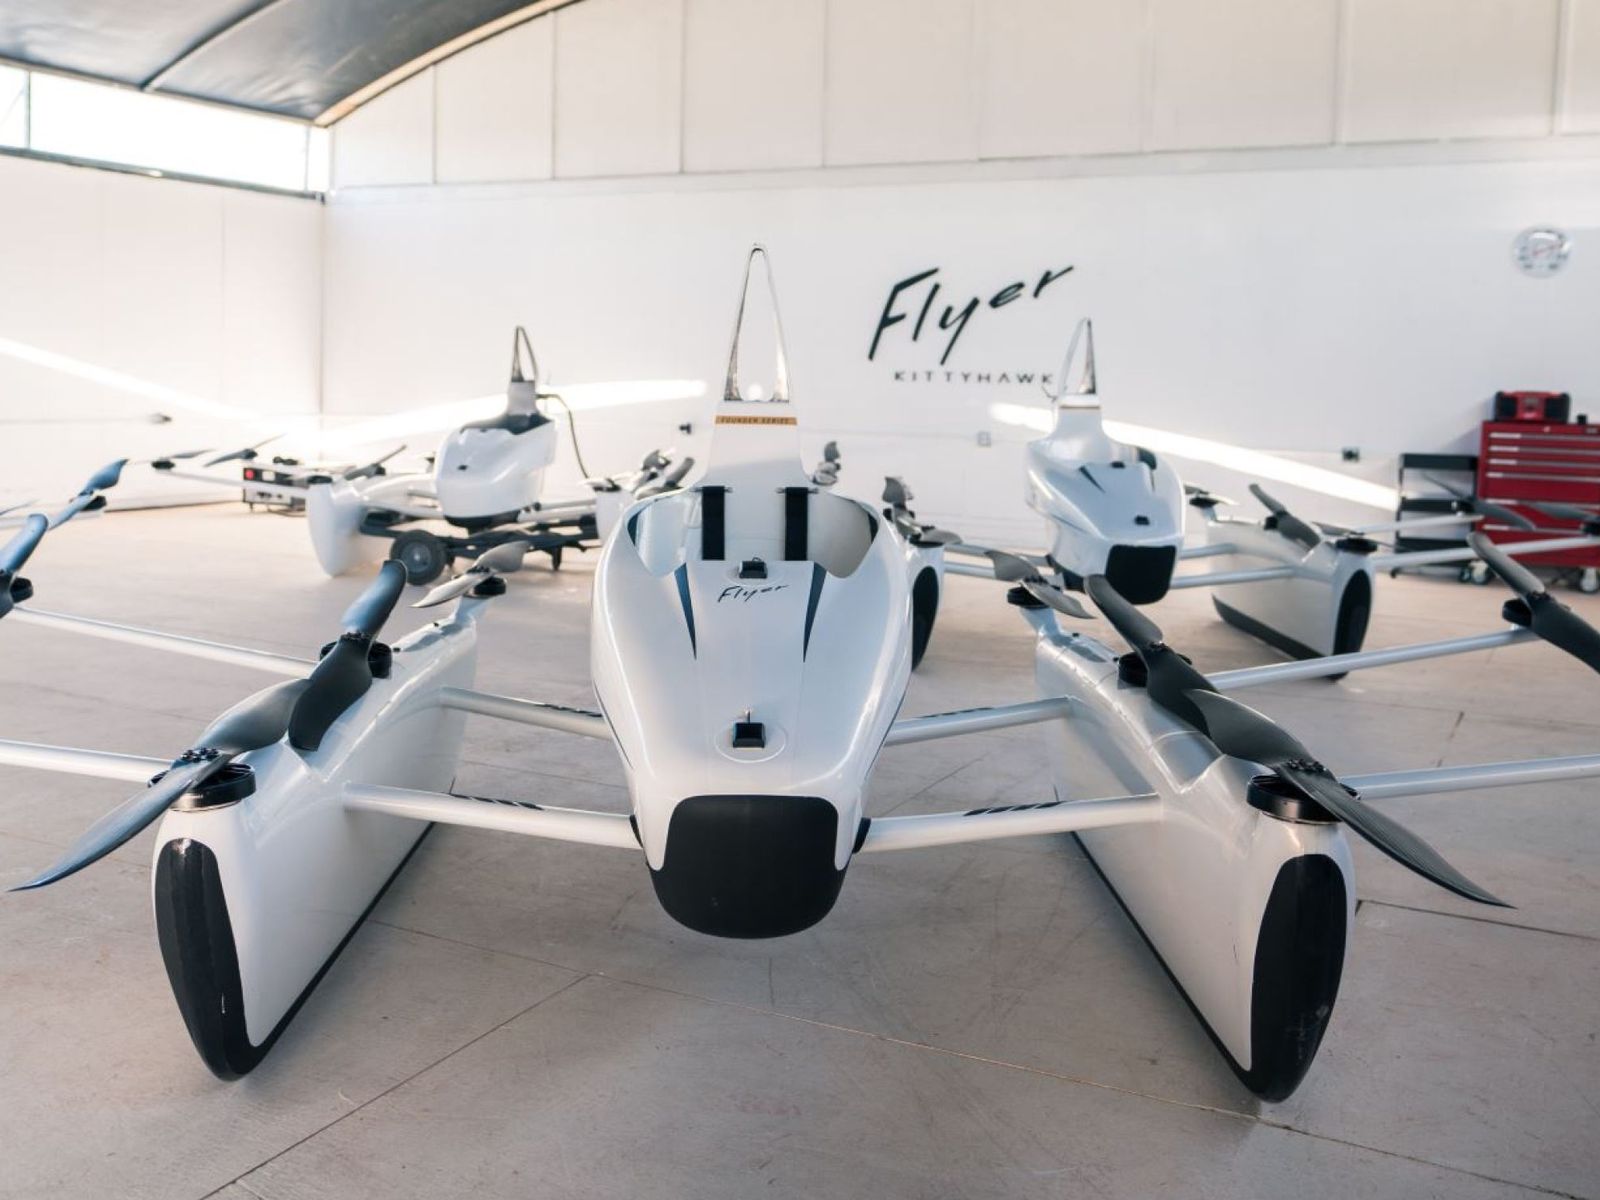 'Exciting step' as test drives of flying car begin